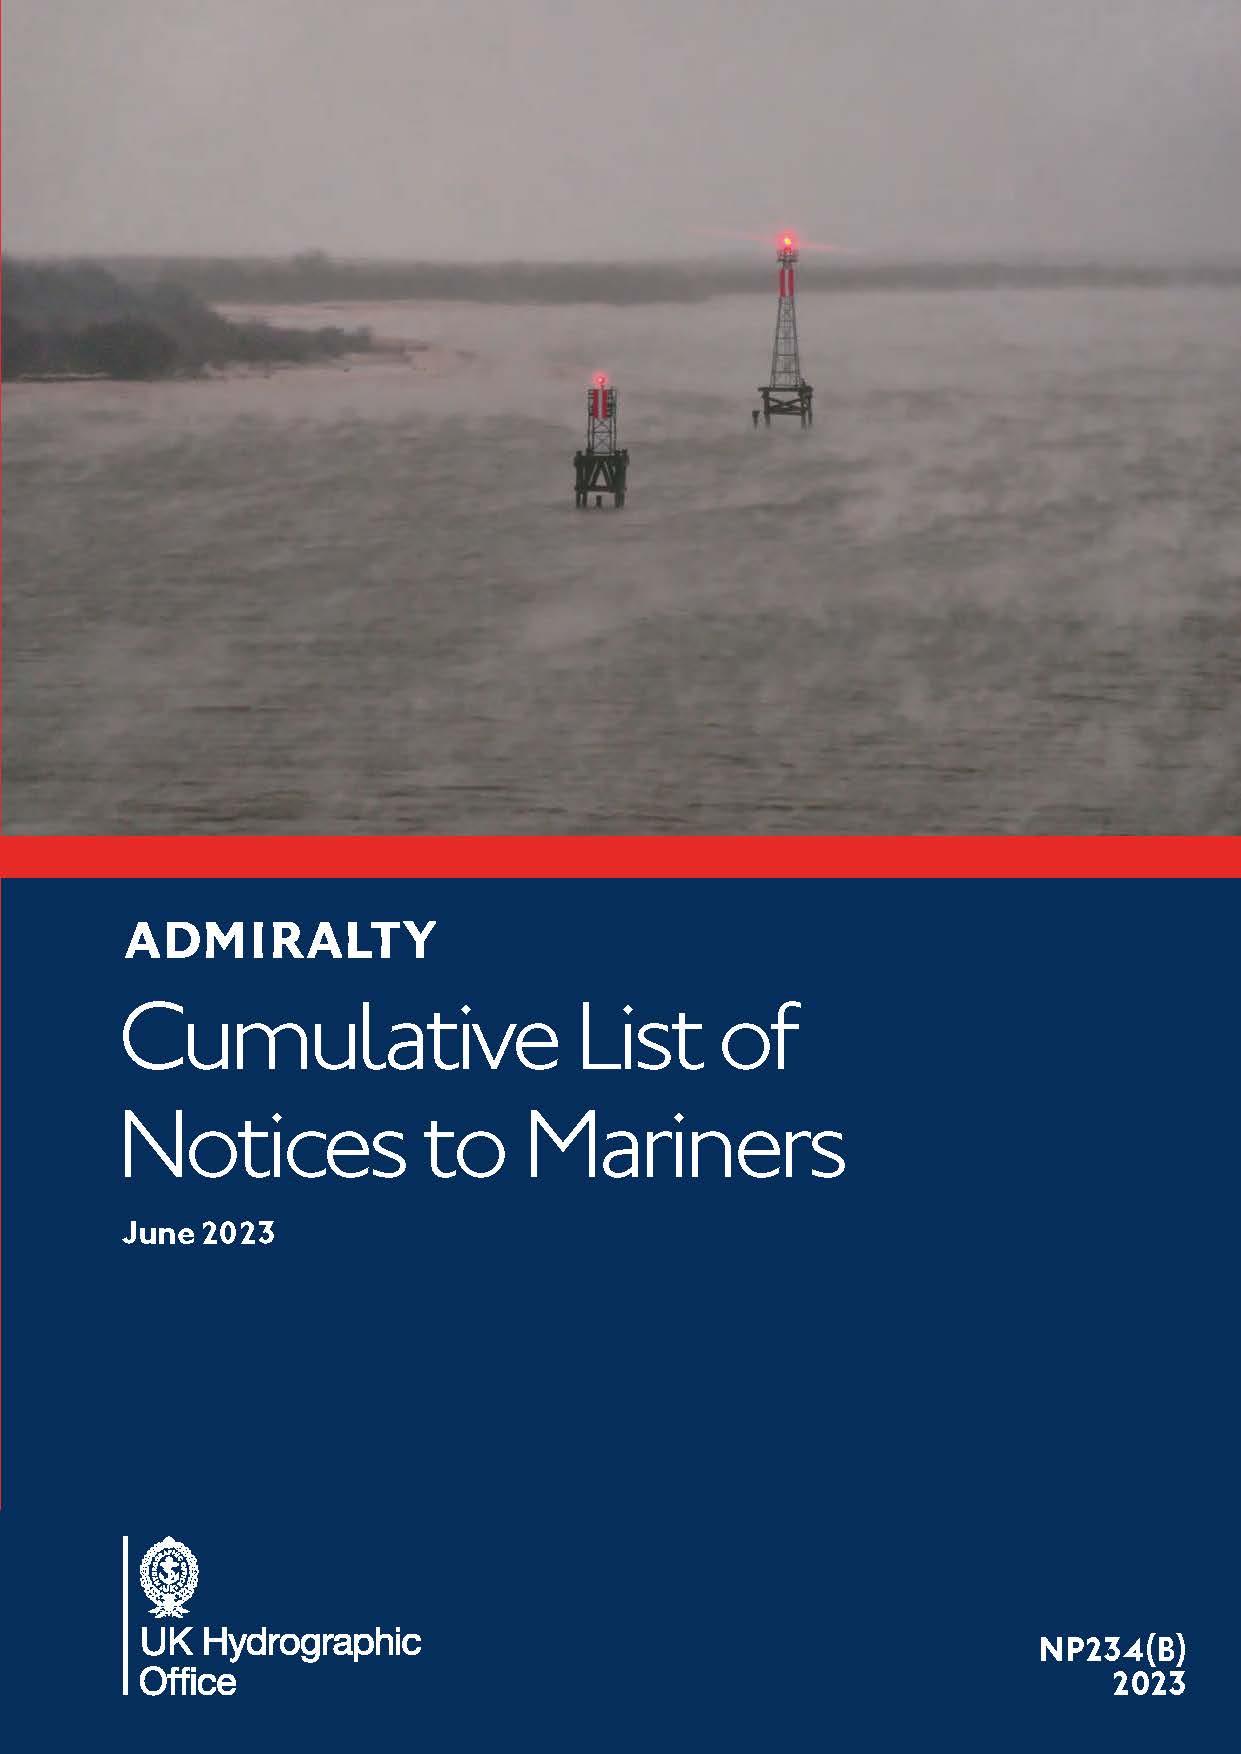 ADMIRALTY NP234B Cumulative List of Notices to Mariners